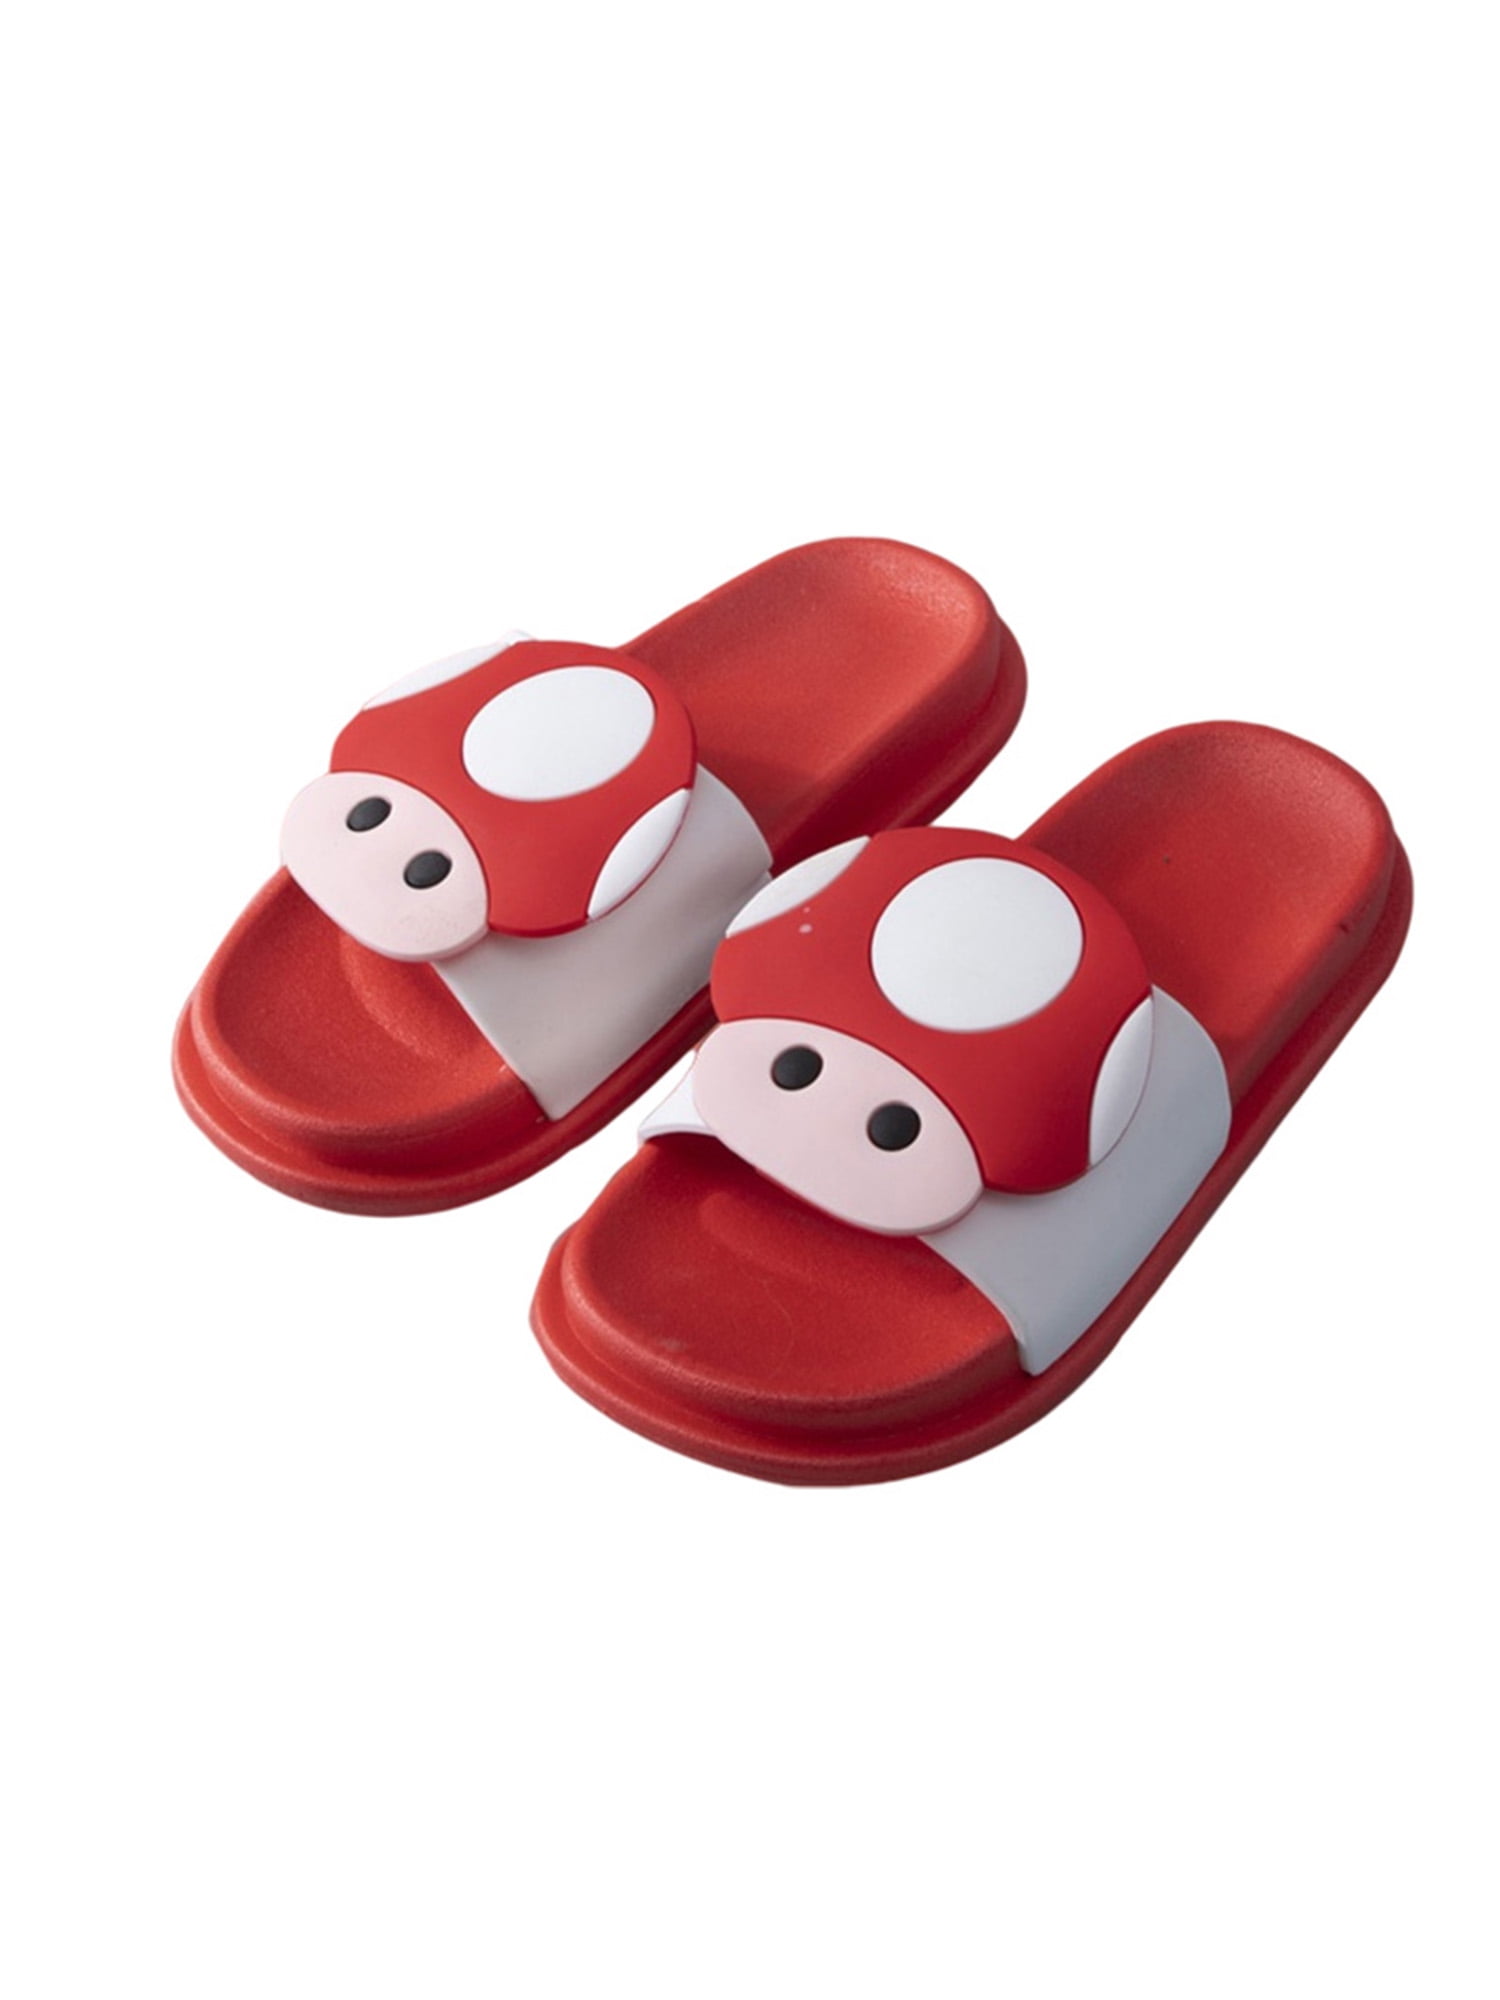 Boys and Girls Monkey Pattern Slide Sandals Indoor & Outdoor Slippers Shoes for Kids